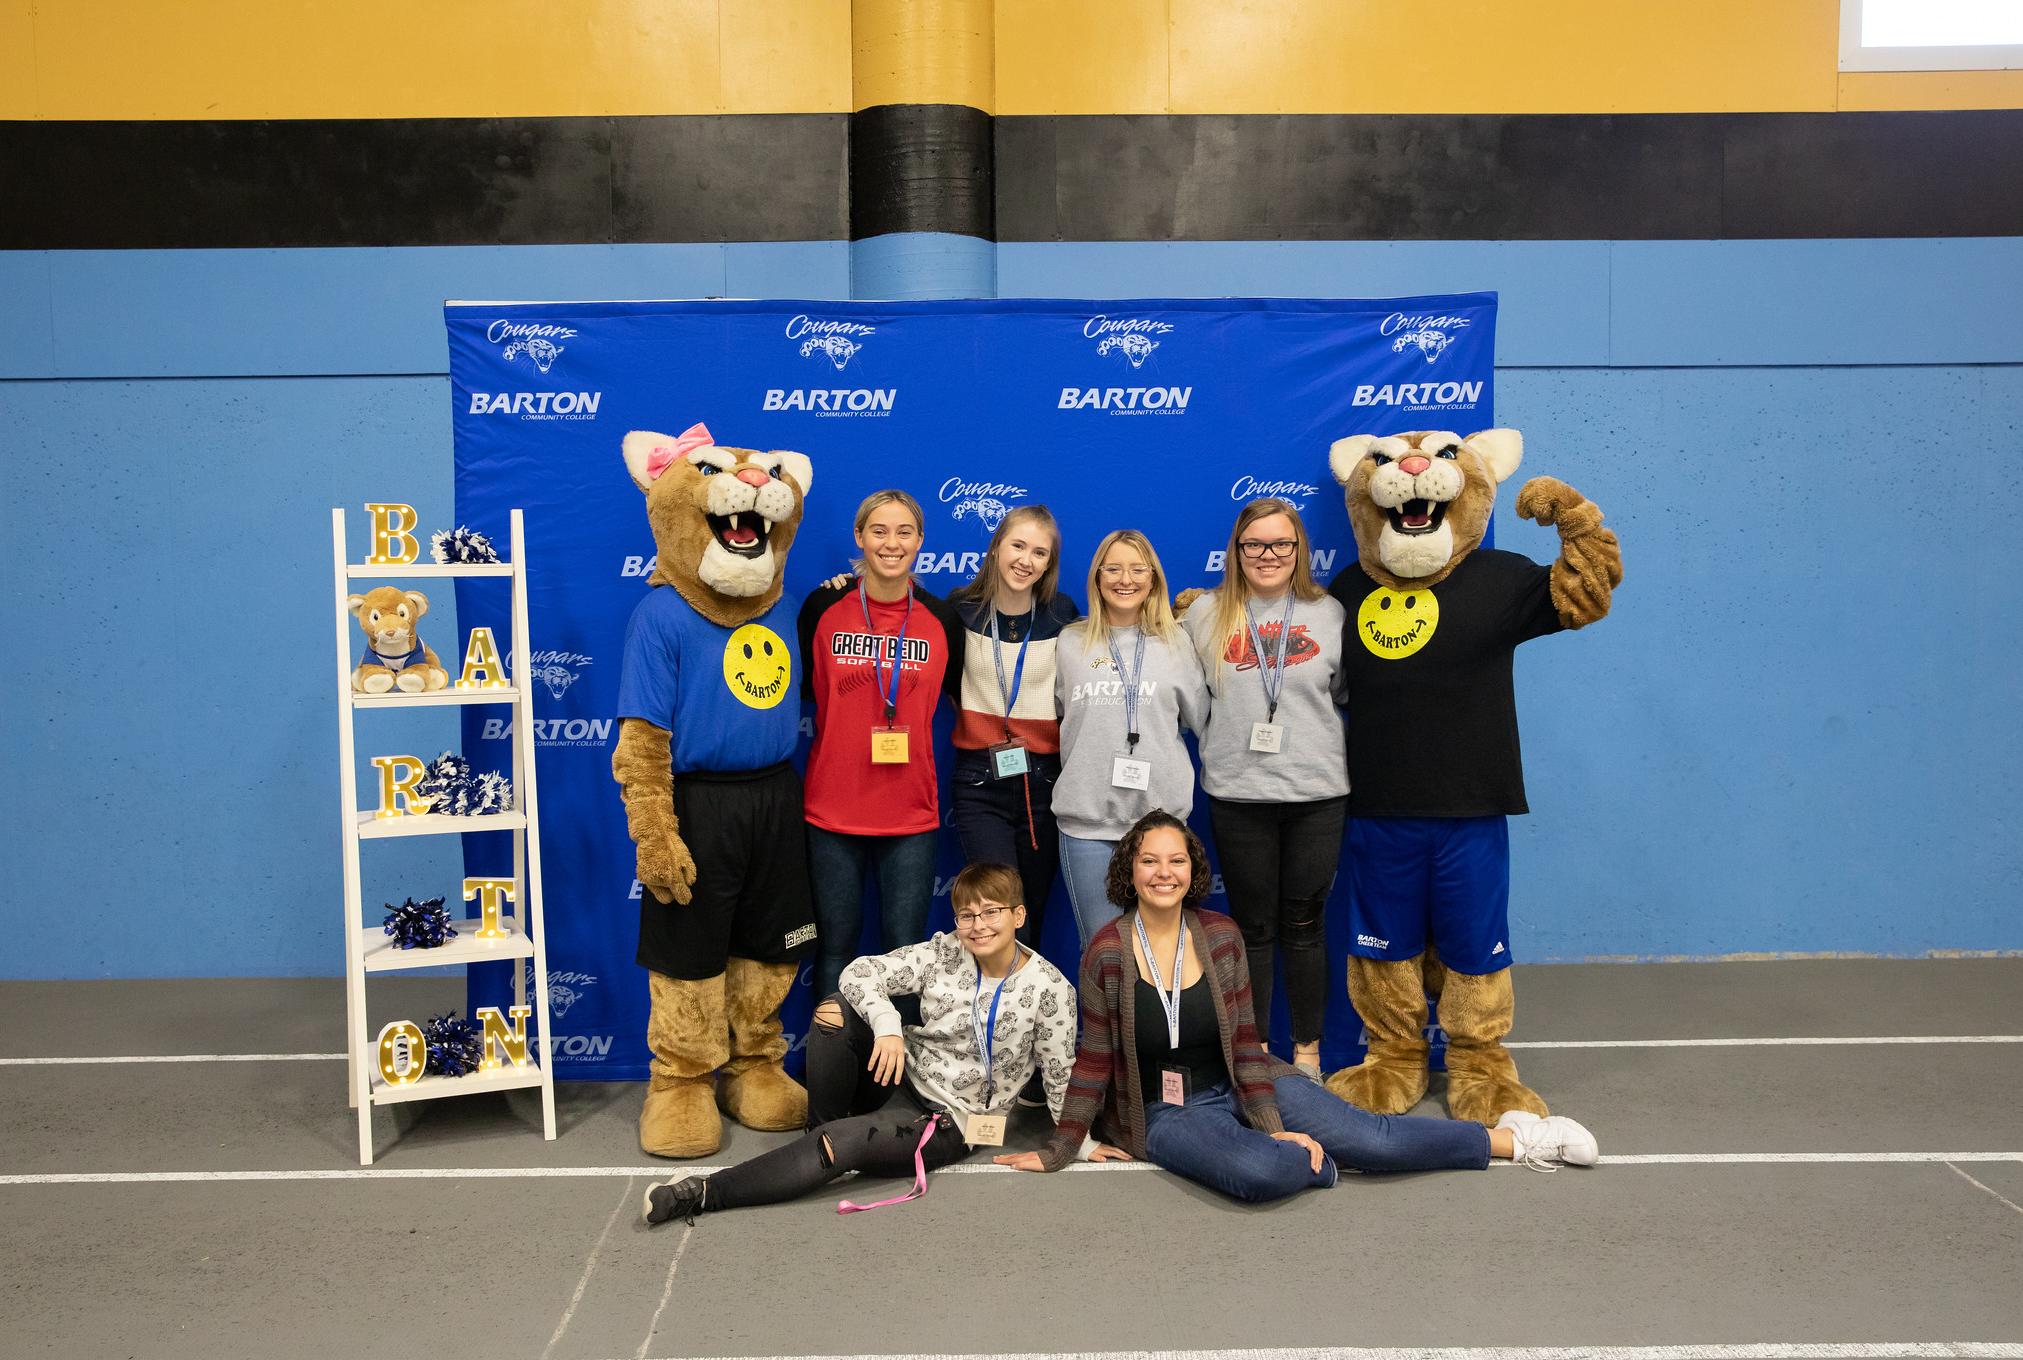 group of students standing with mascots in front of a branded backdrop